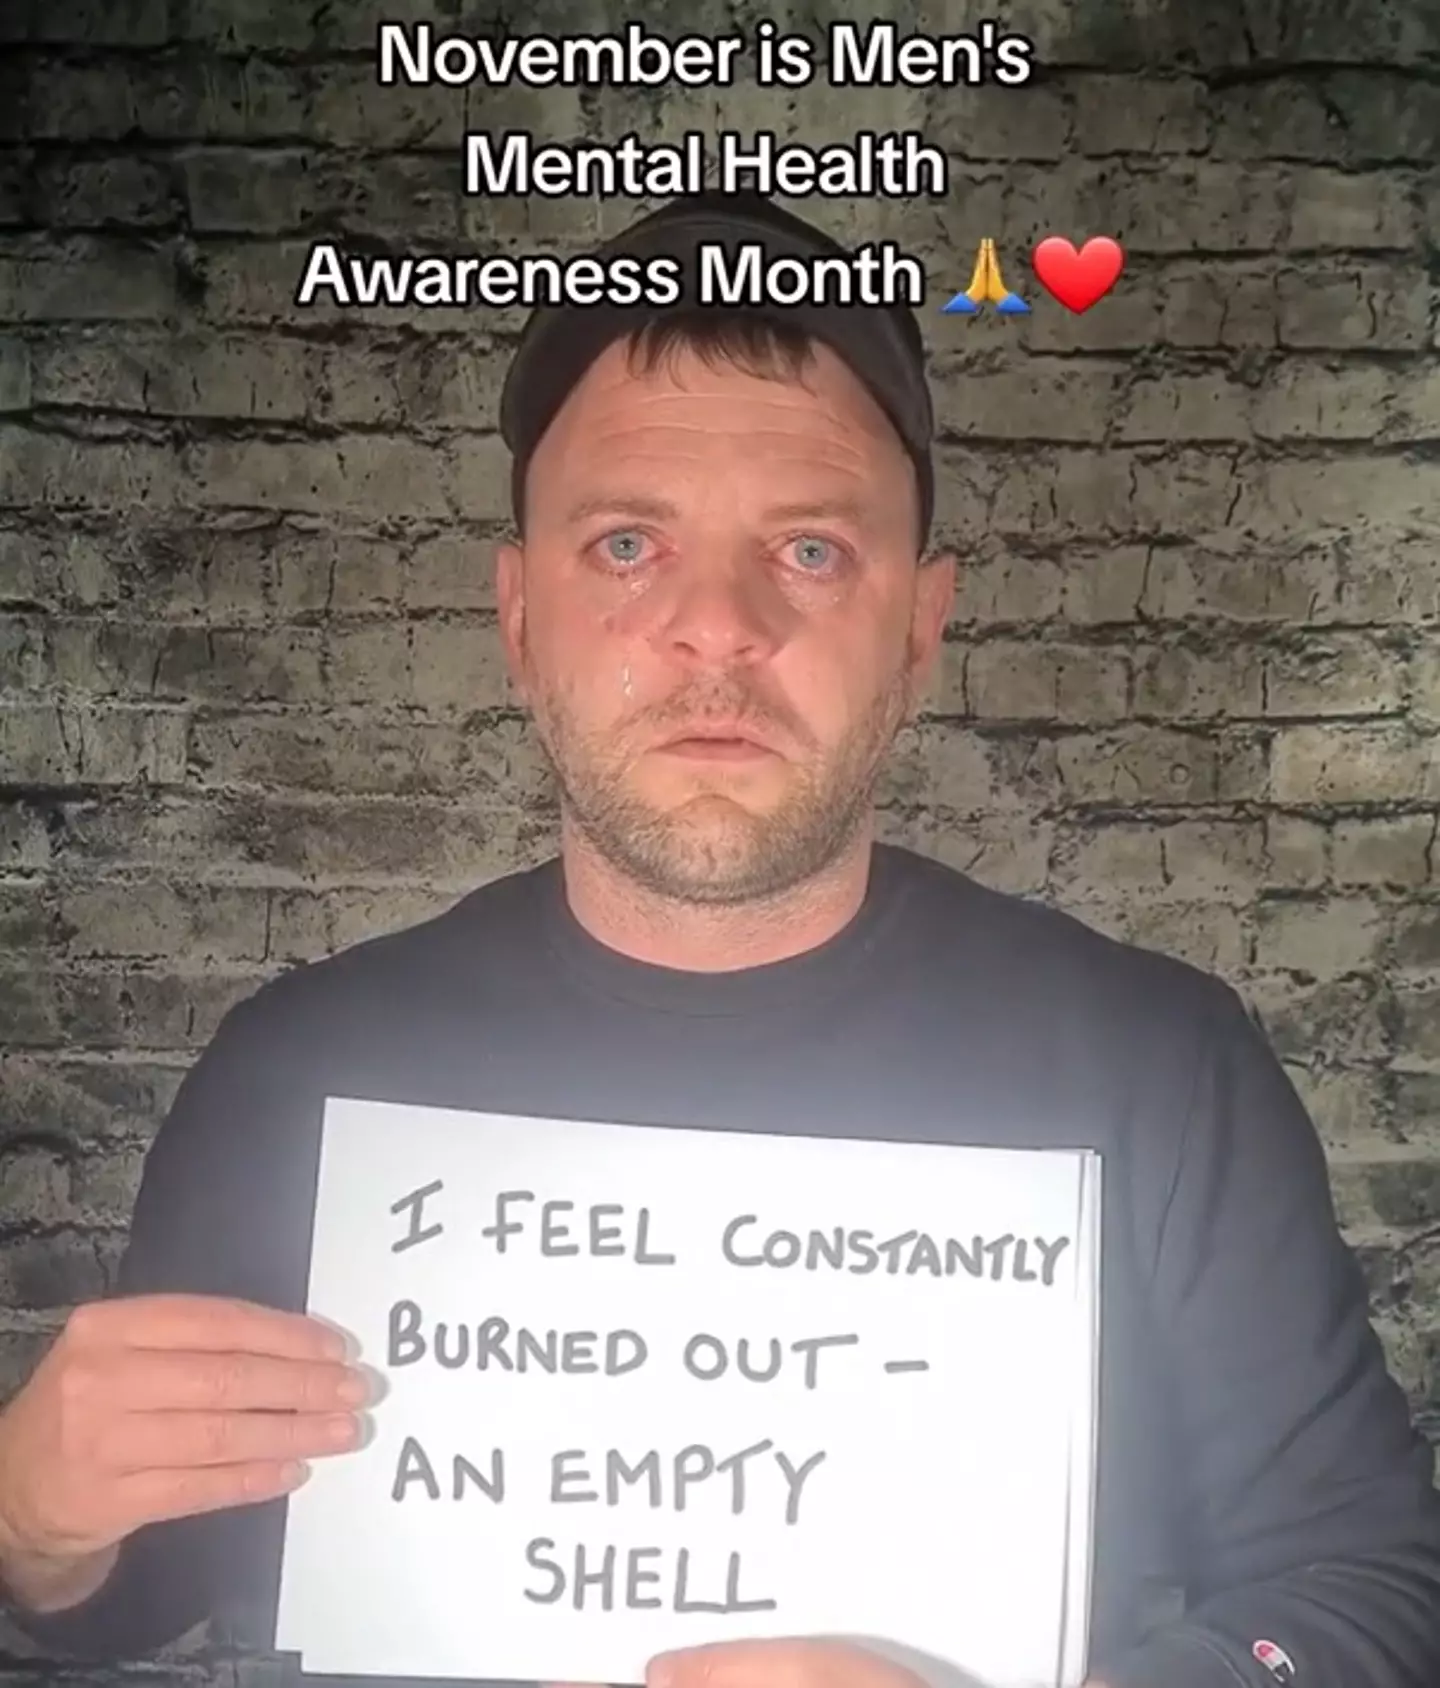 The actor has made a number of videos focusing on mental health.